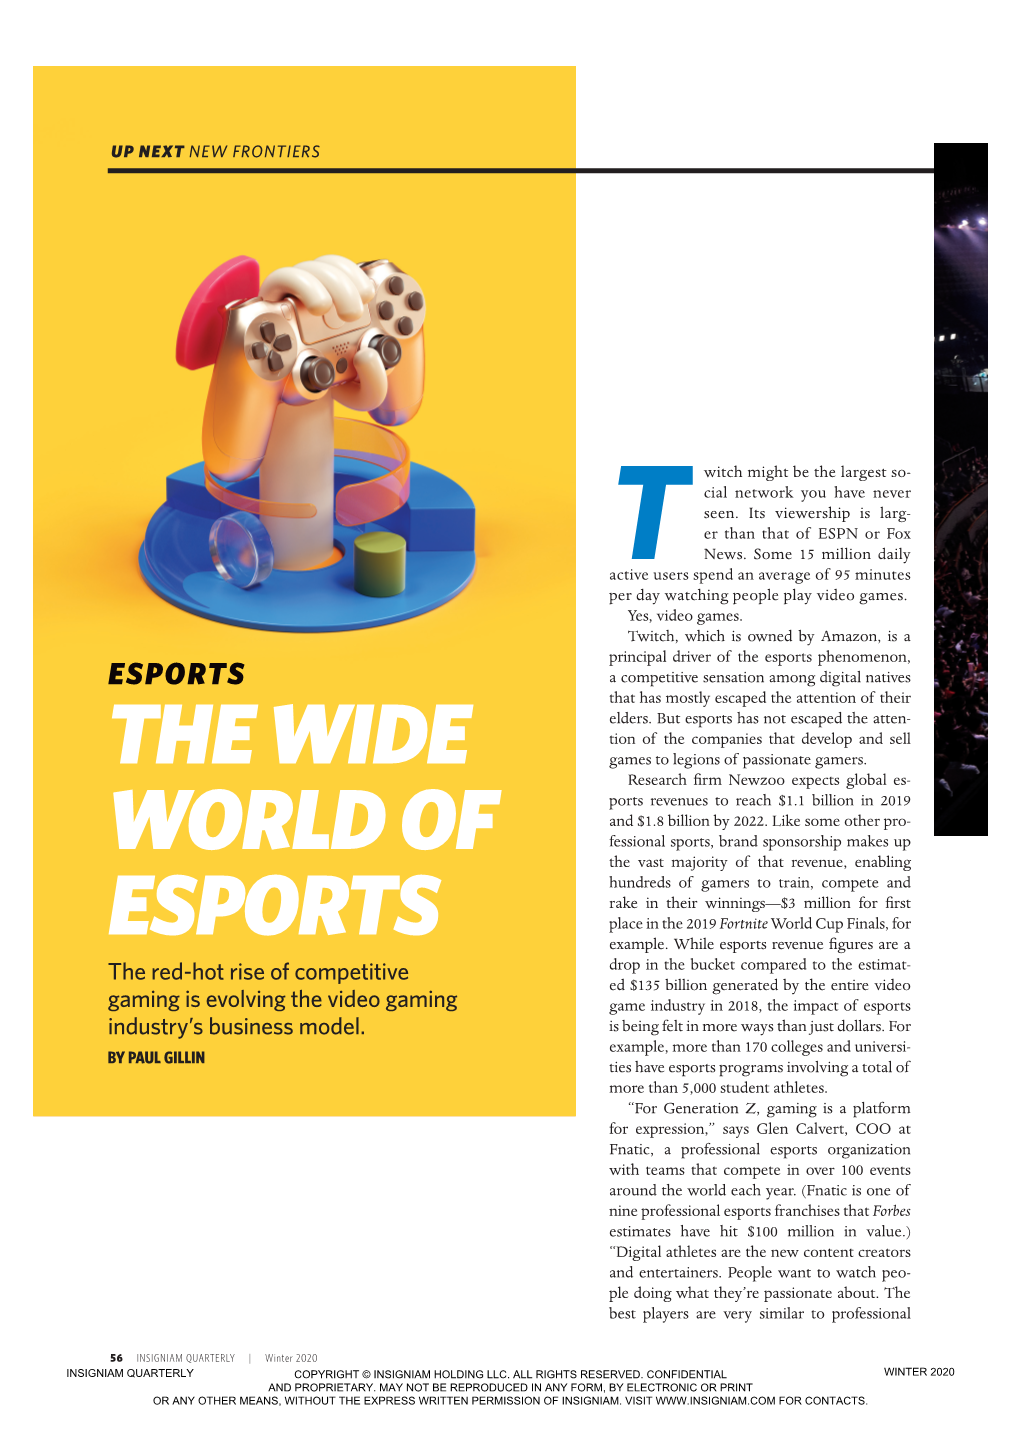 The Wide World of Esports